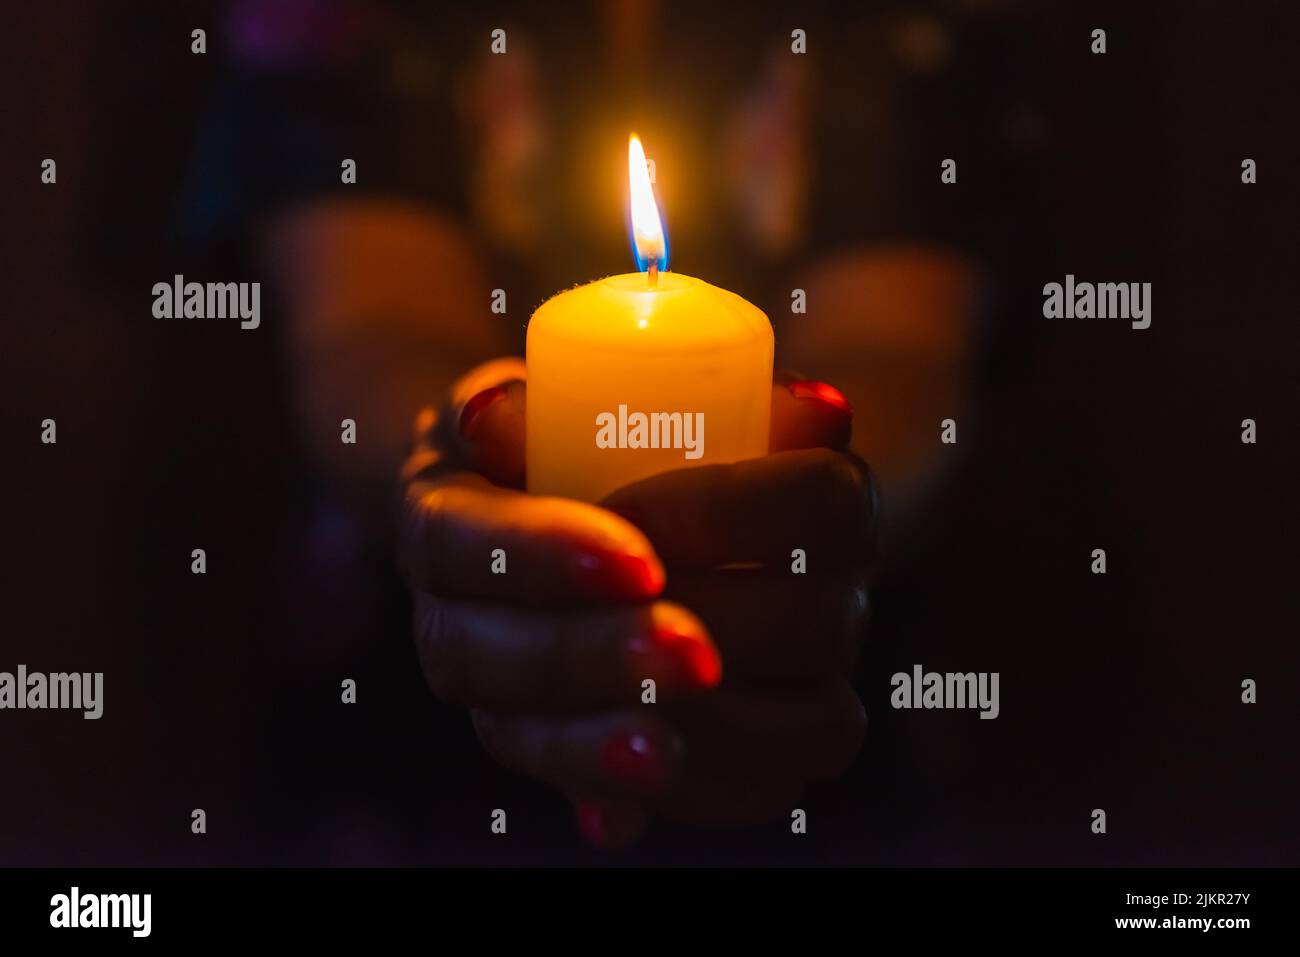 Candle in female hands on black dark background.Prayers candle in hands. Stock Photo